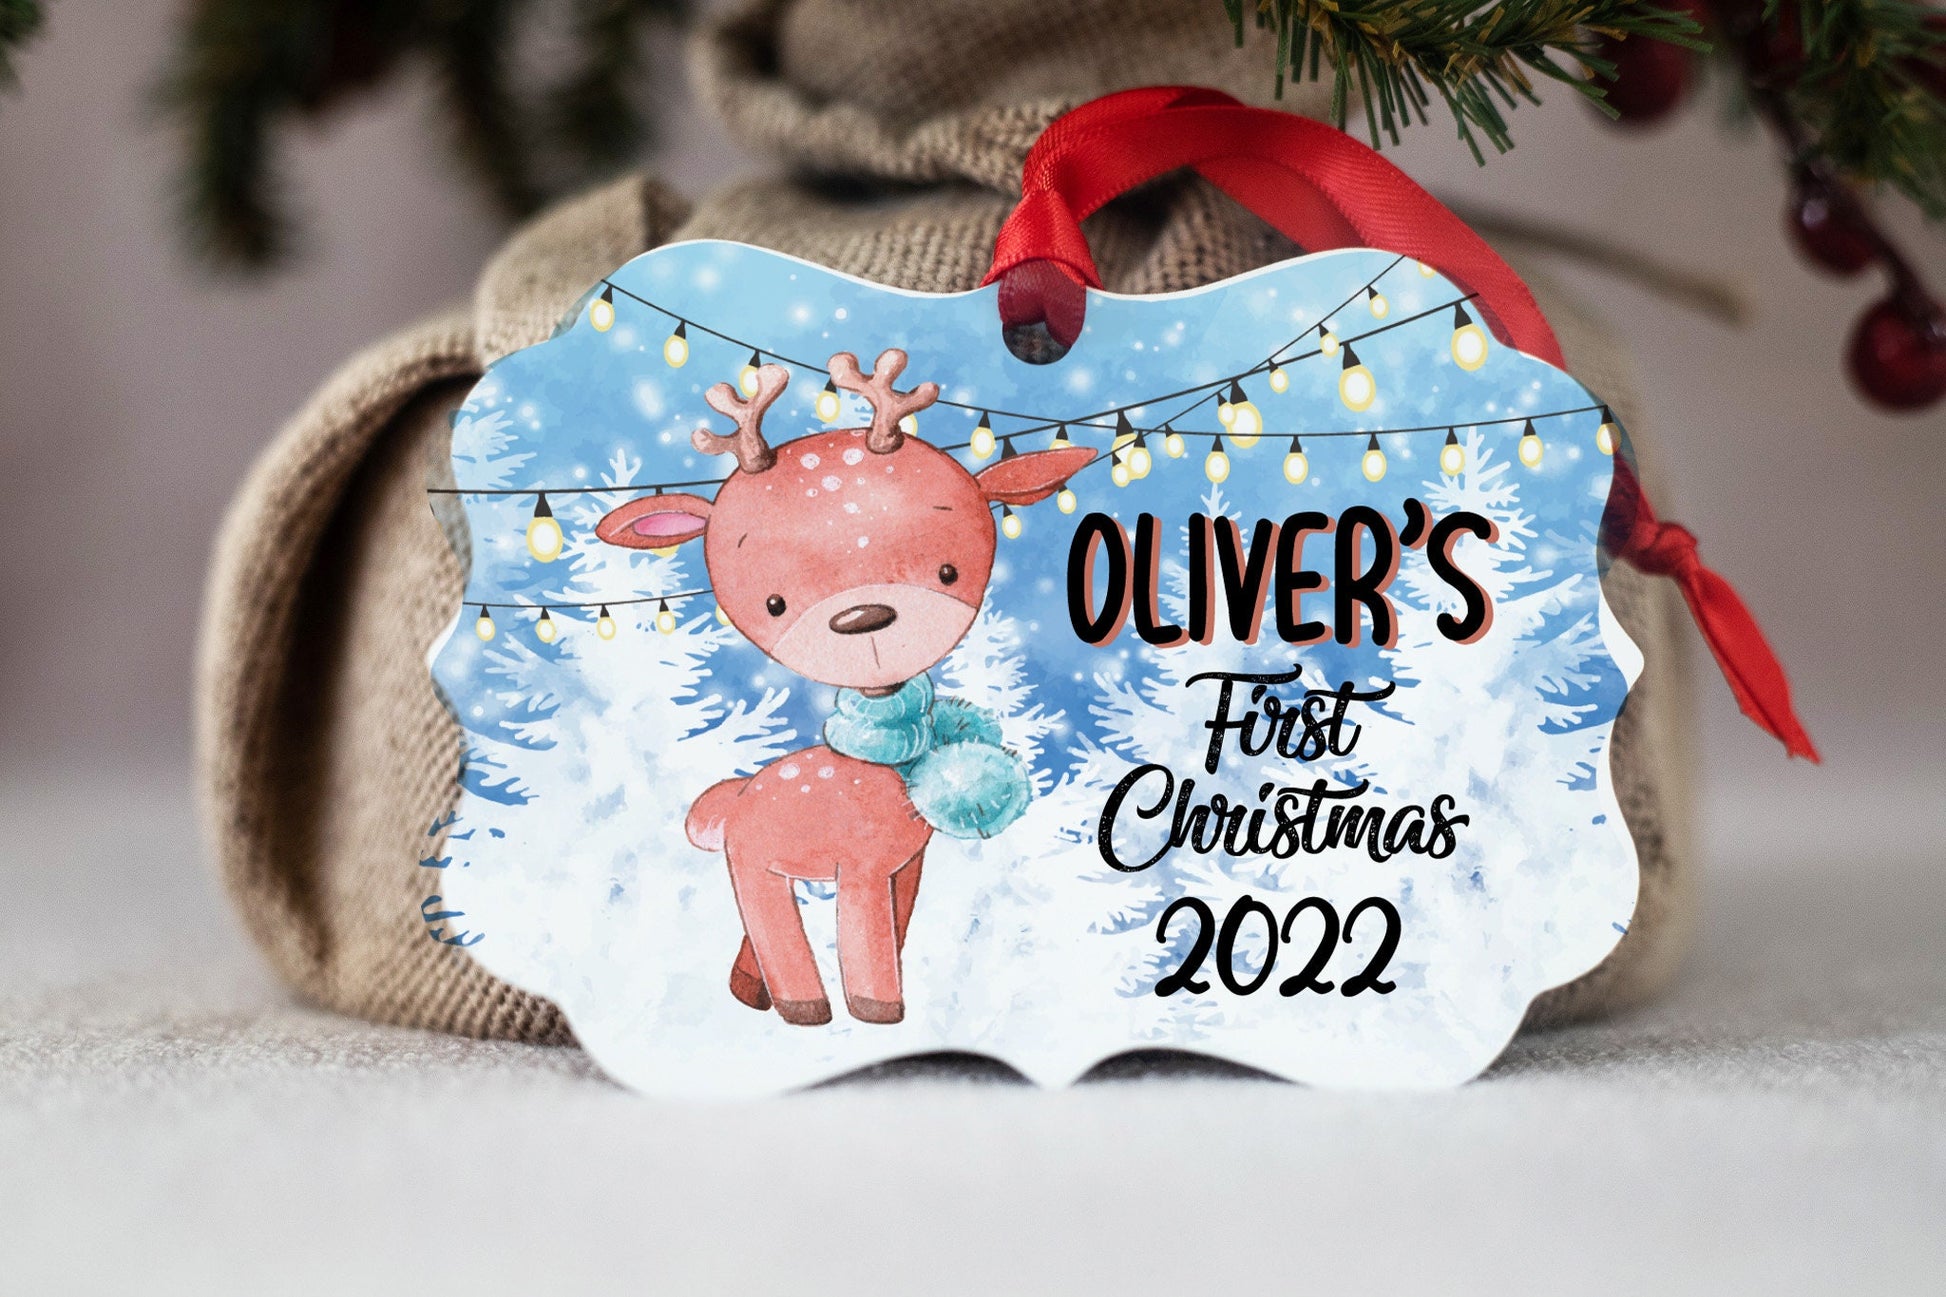 First Christmas Ornament 2022, New Baby Gift, Baby Christmas Ornament, Baby Ornament, Christmas Decor, Personalized Baby Christmas Gift